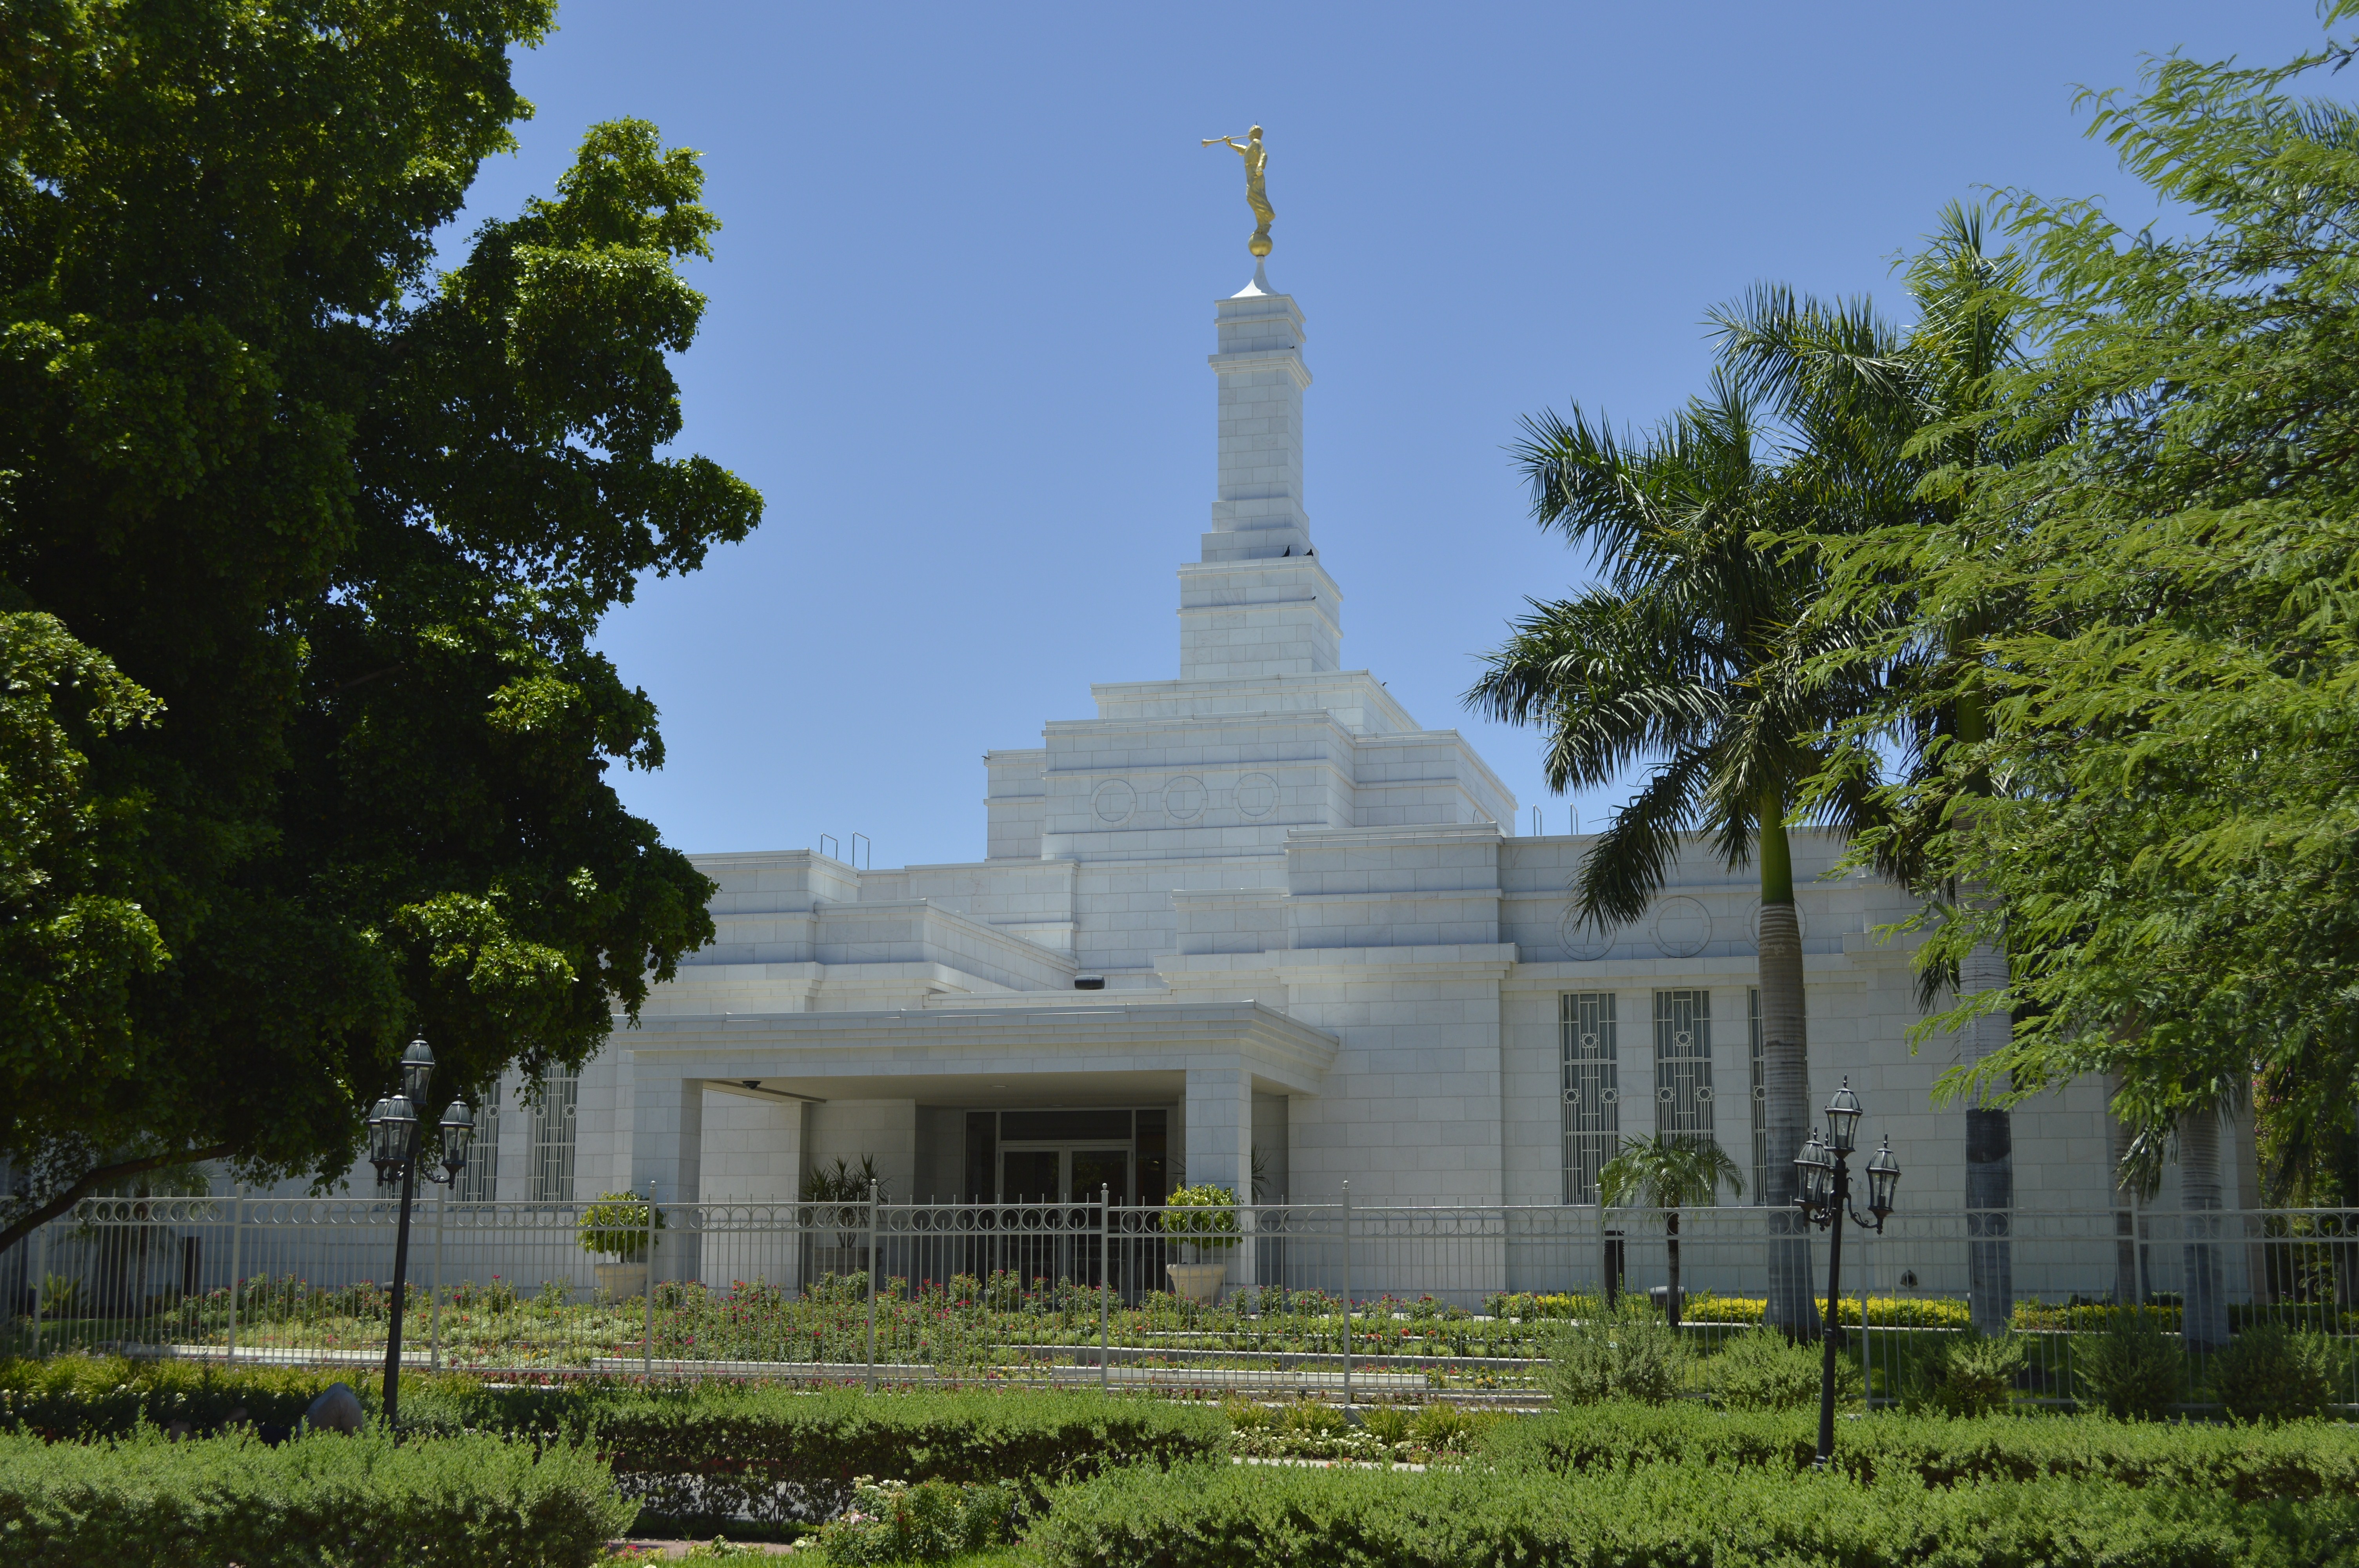 The Hermosillo Sonora Mexico Temple on a sunny day, surrounded by green shrubbery and trees.